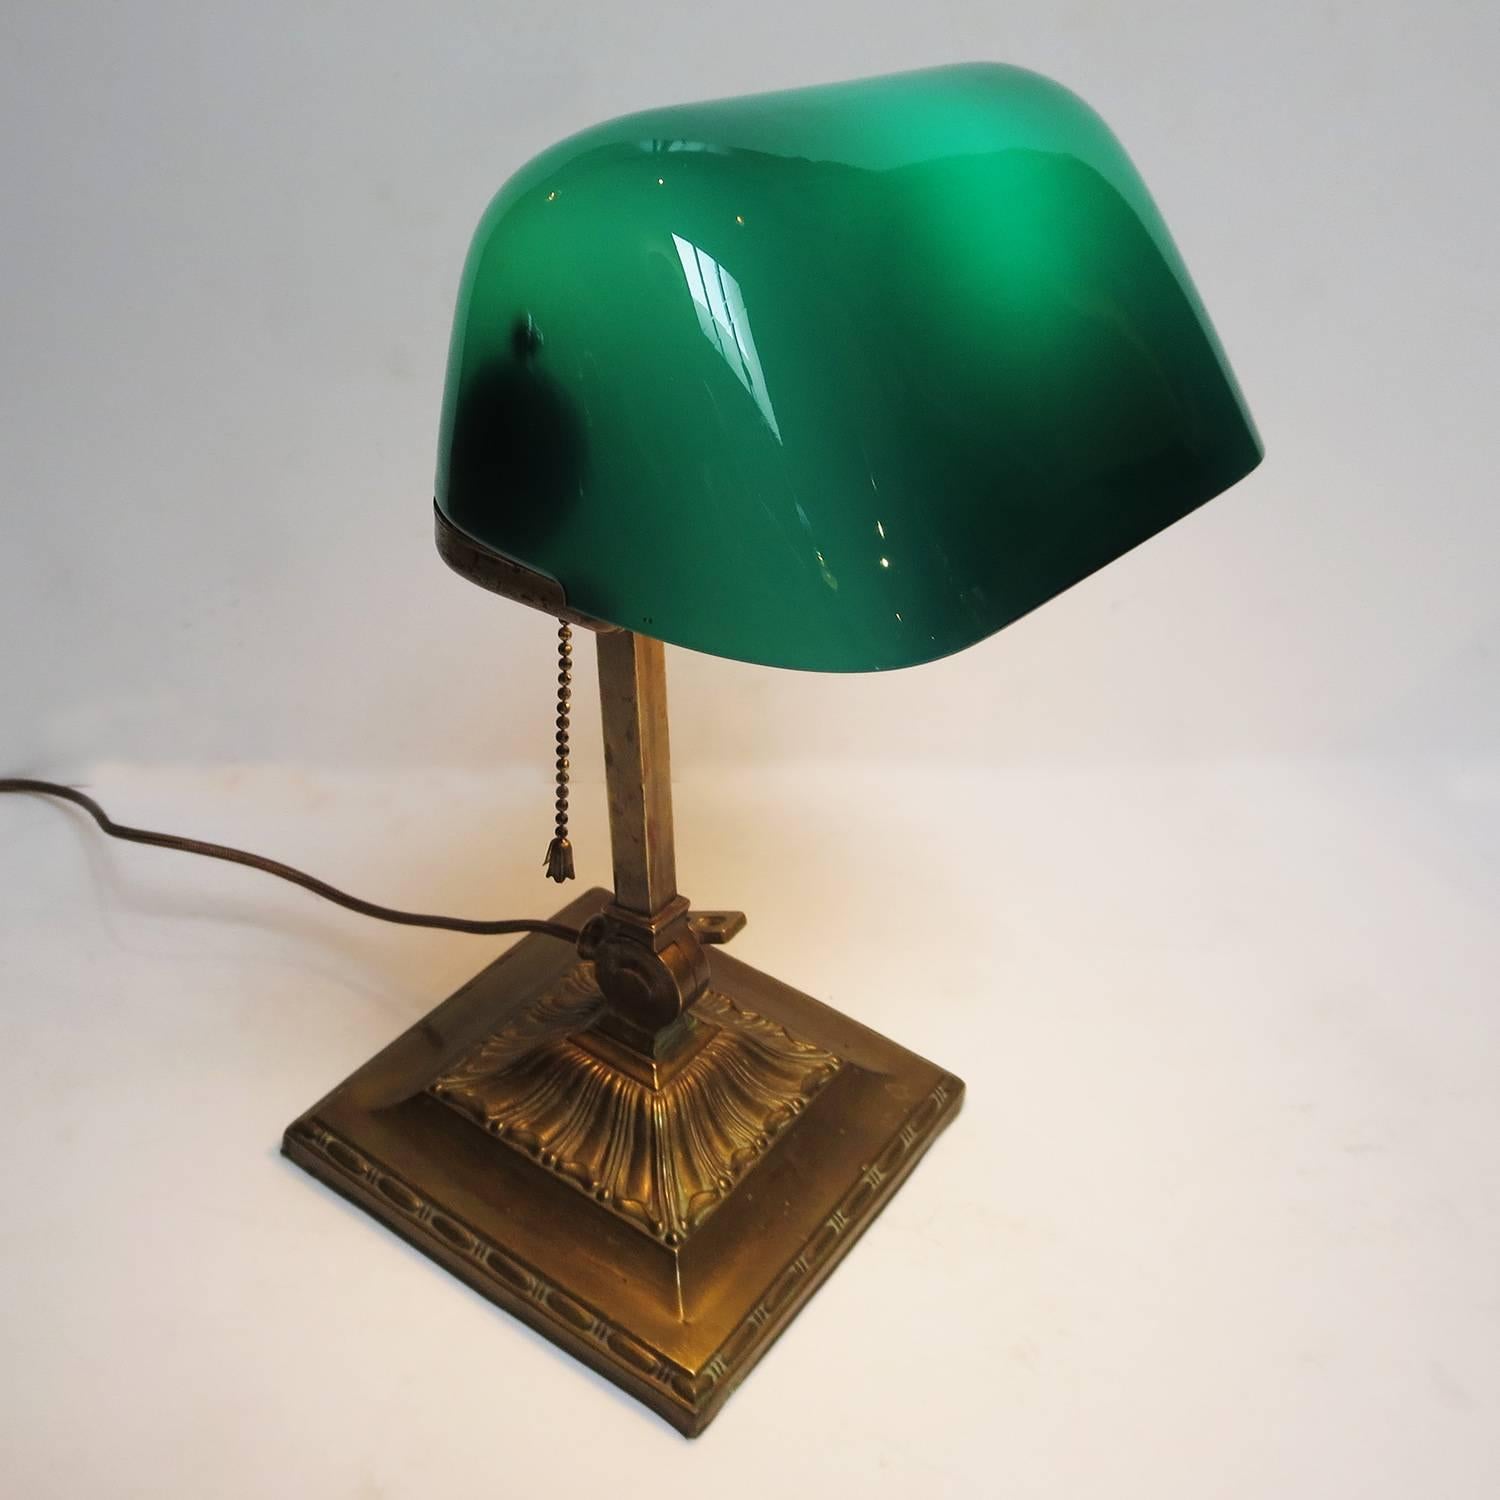 First produced in 1909, the Emeralite desk lamp was the creation of Harrison McFaddin of New York. They are often referred to as 